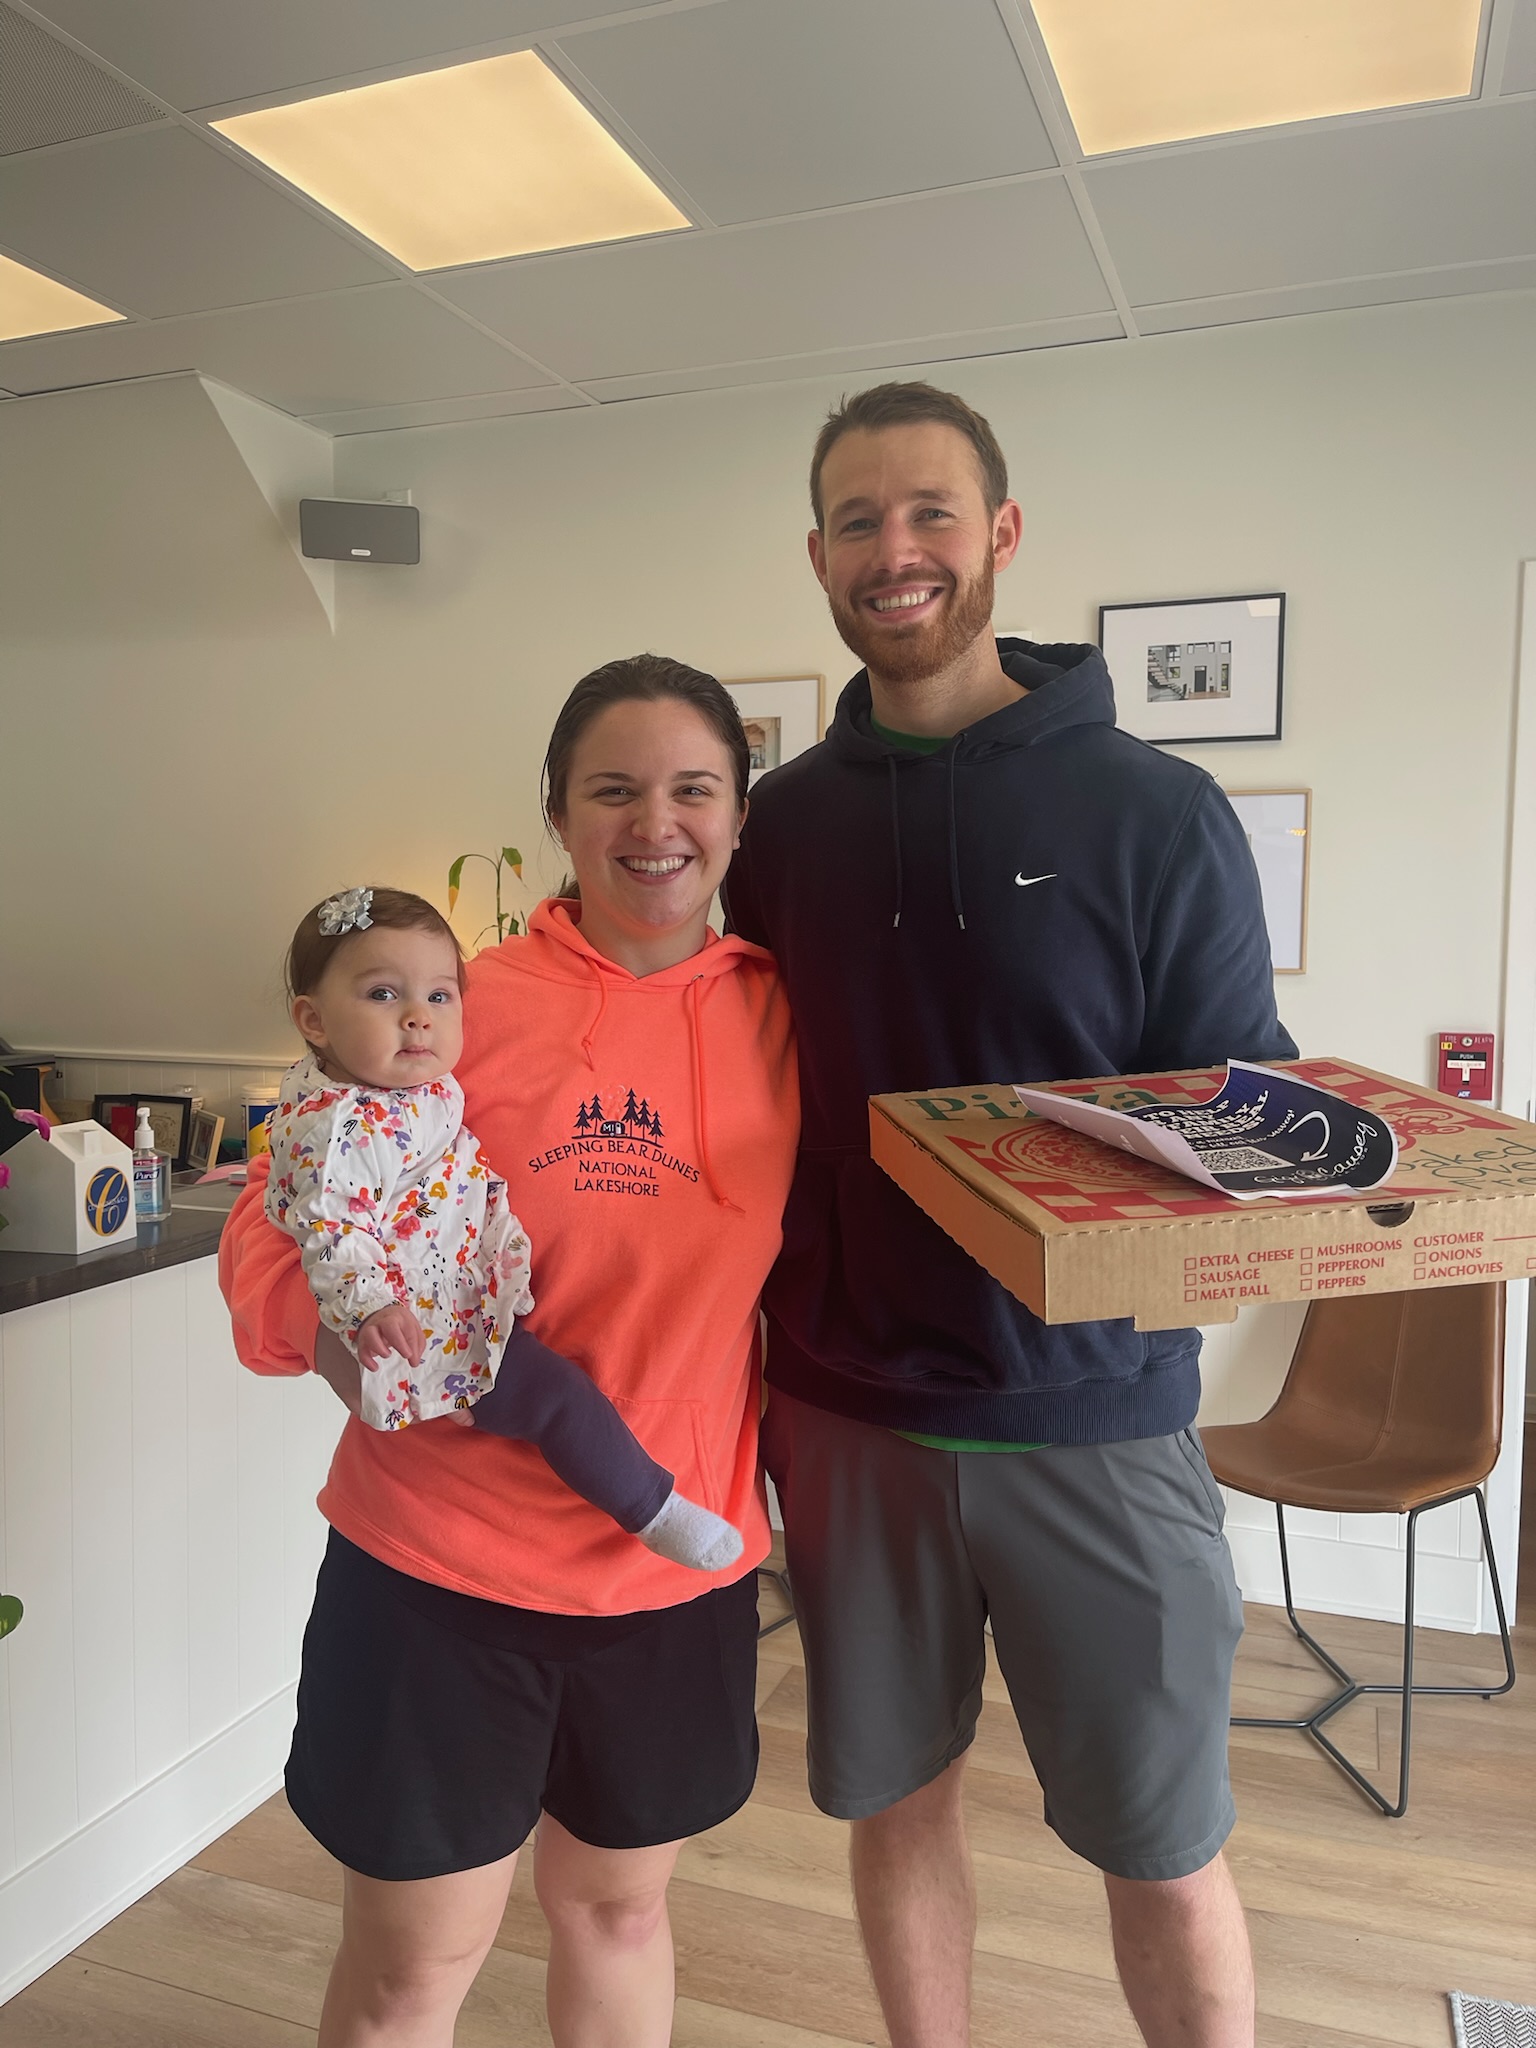 lovely family picking up a pizza